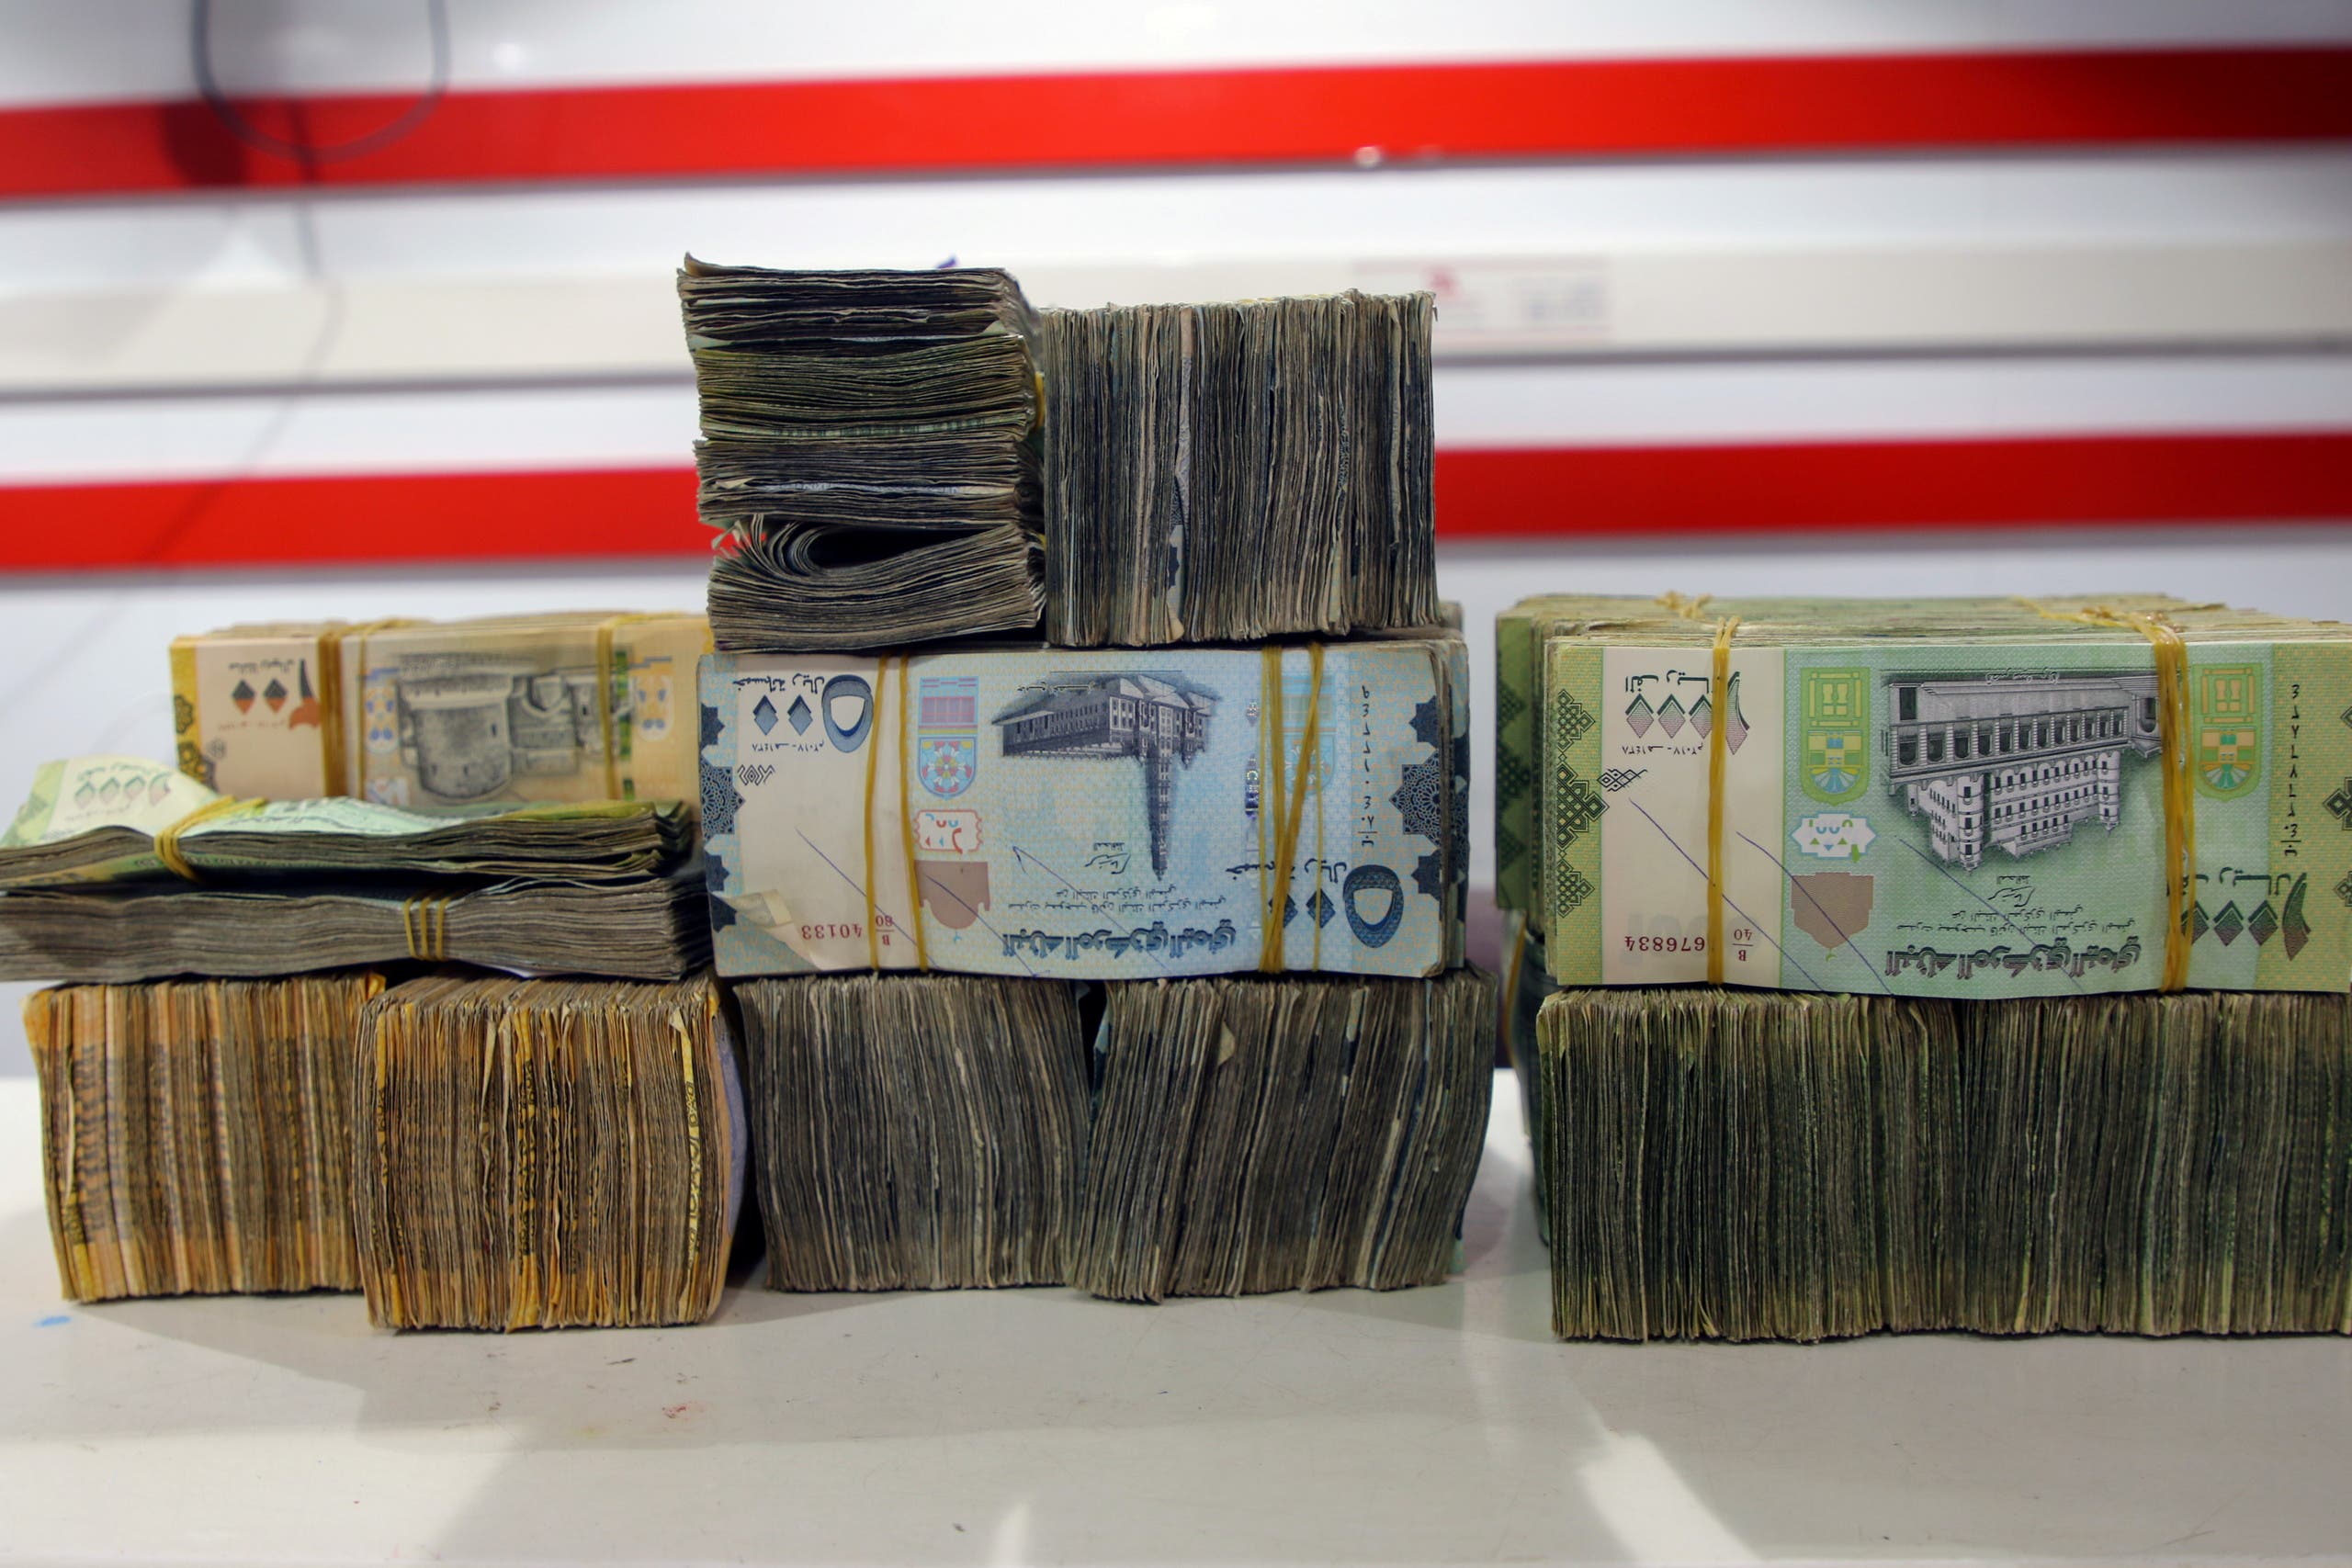 Yemeni currency at an exchange office in Aden